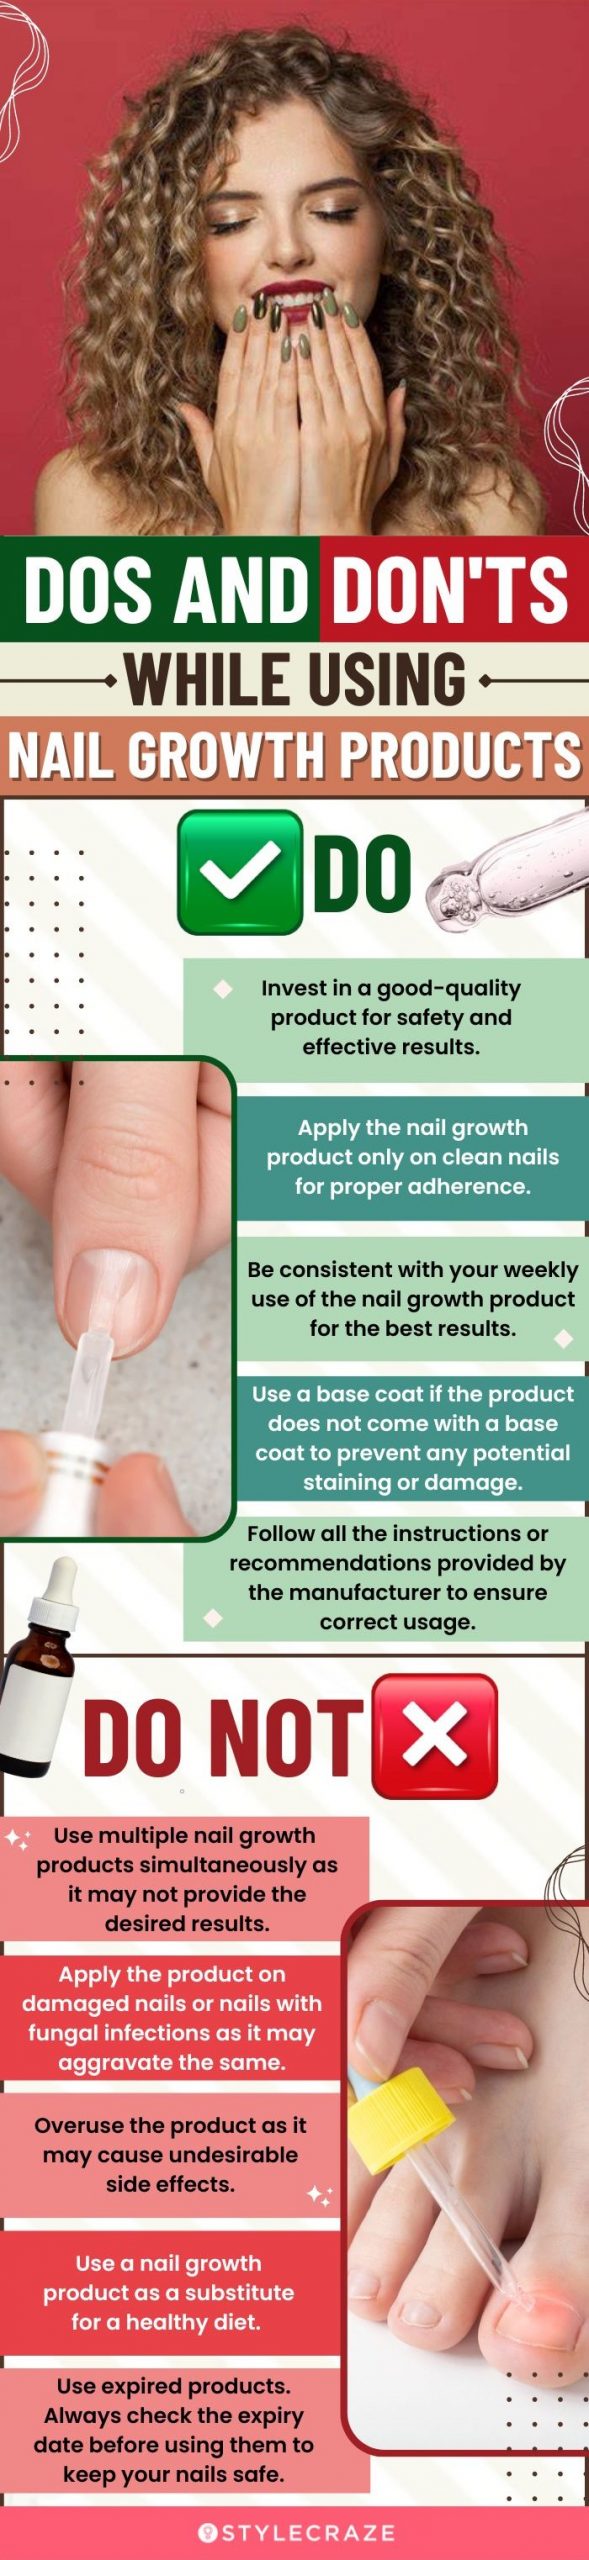 Dos And Don’ts While Using Nail Growth Products(infographic)